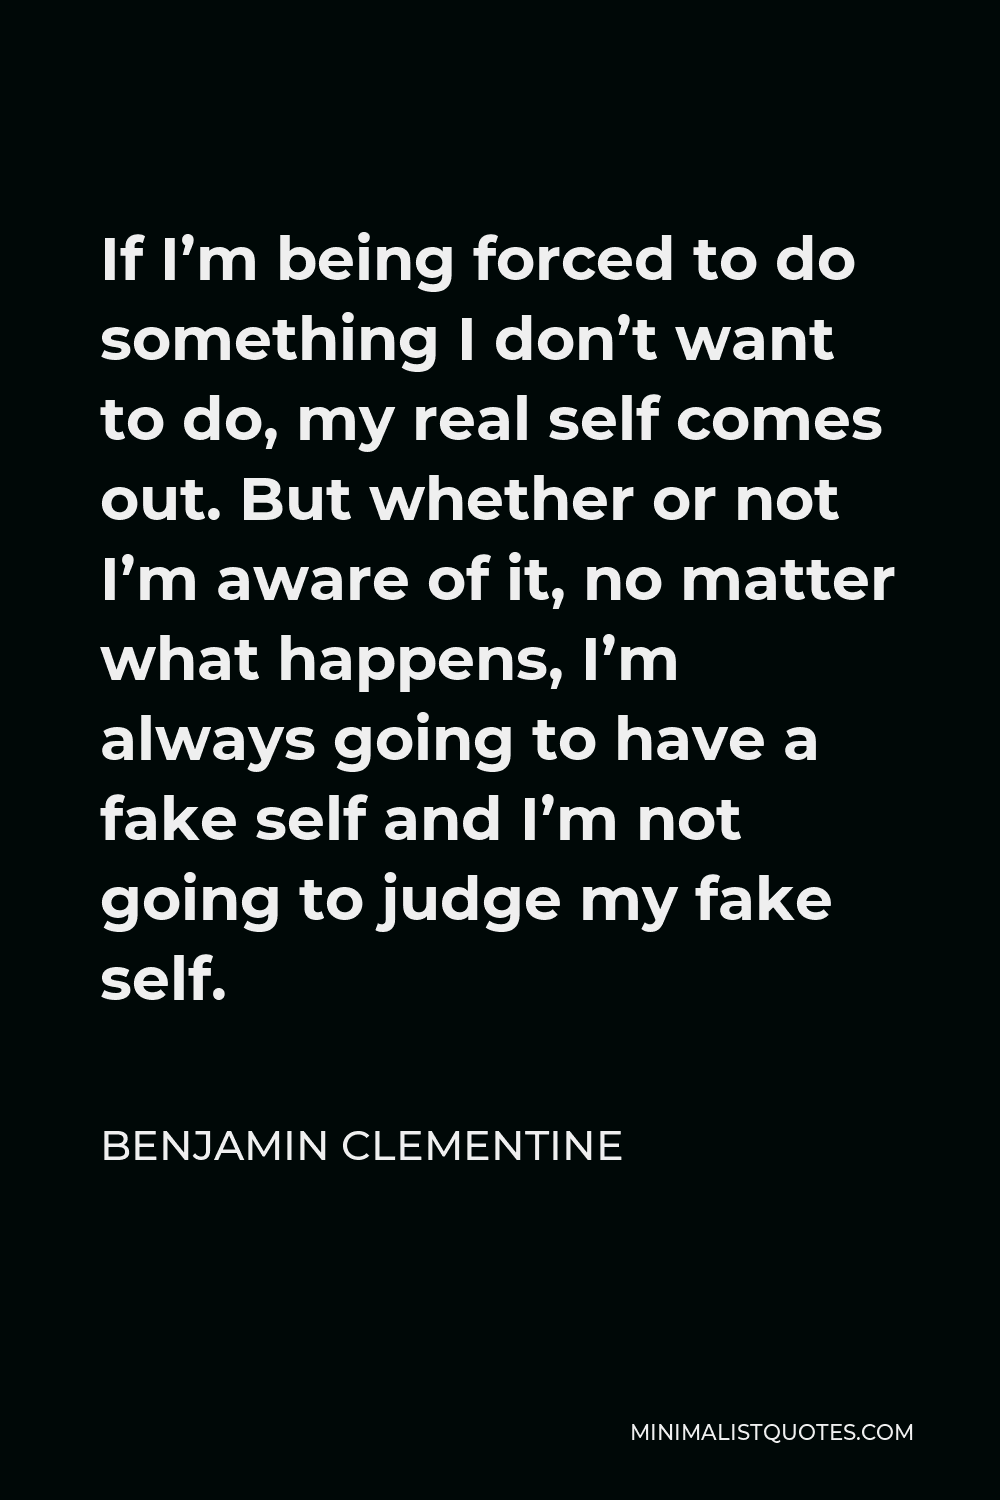 Benjamin Clementine Quote - If I’m being forced to do something I don’t want to do, my real self comes out. But whether or not I’m aware of it, no matter what happens, I’m always going to have a fake self and I’m not going to judge my fake self.